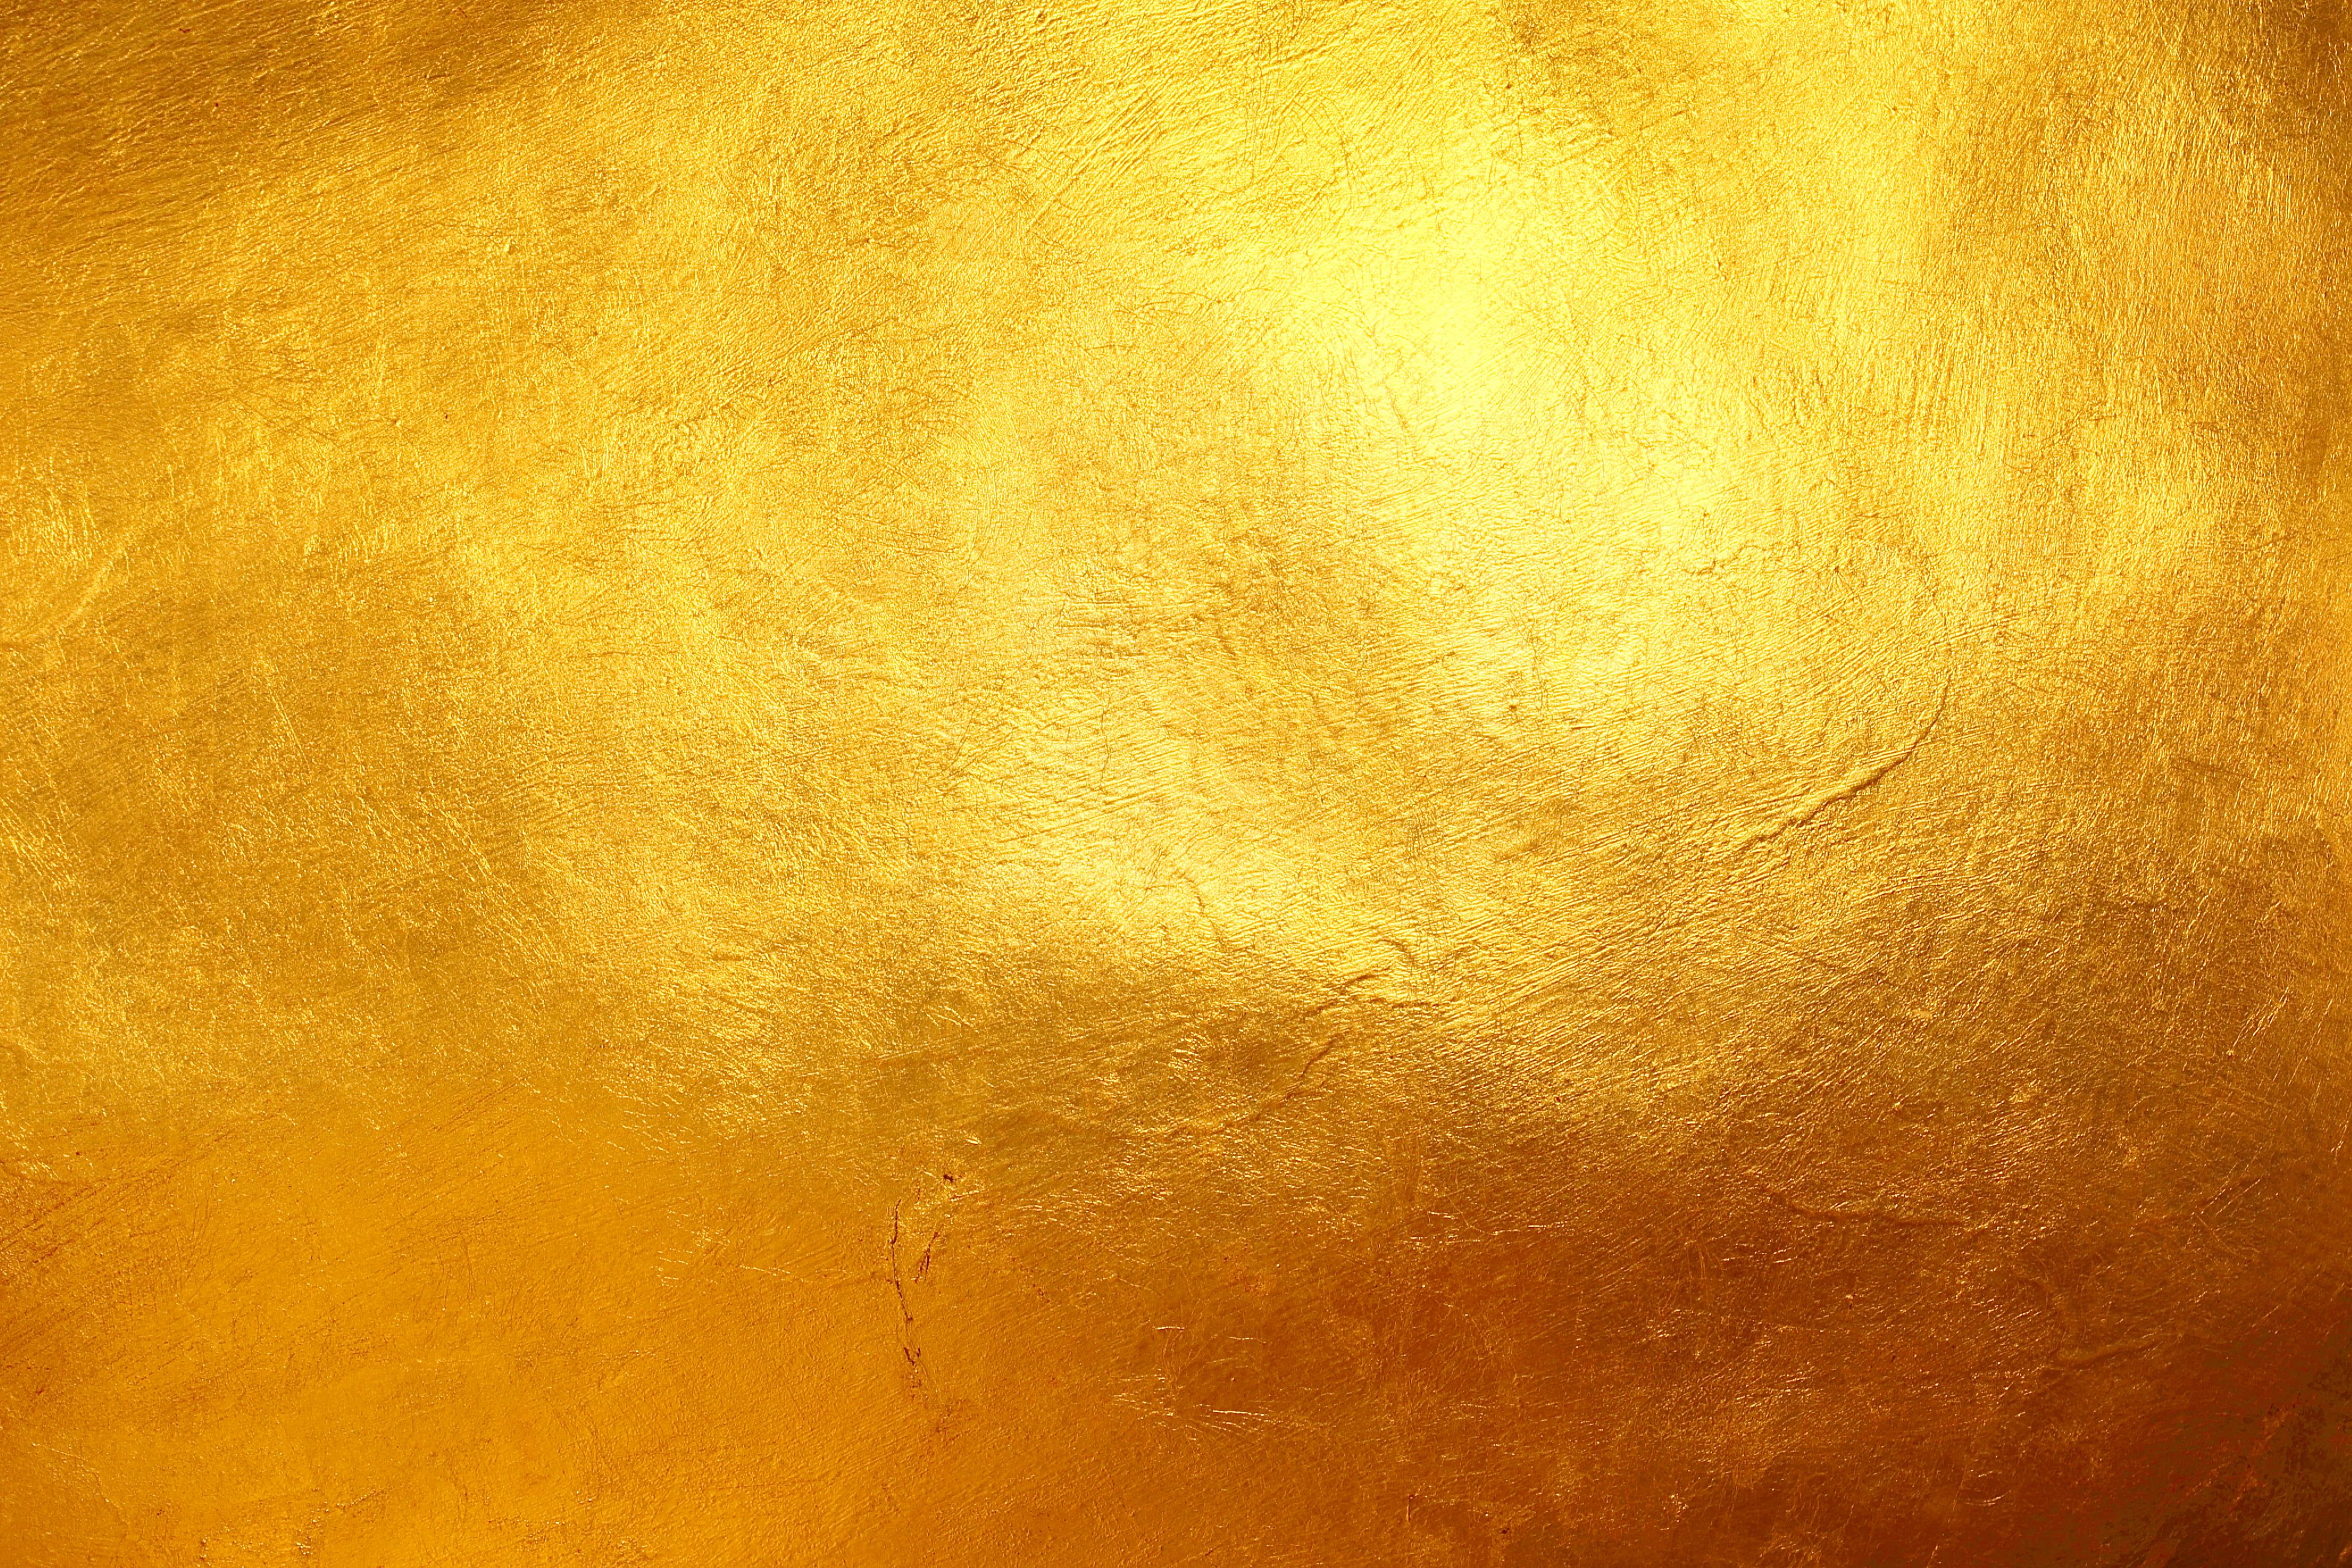 gold backgrounds image wallpaper cave on gold background hd